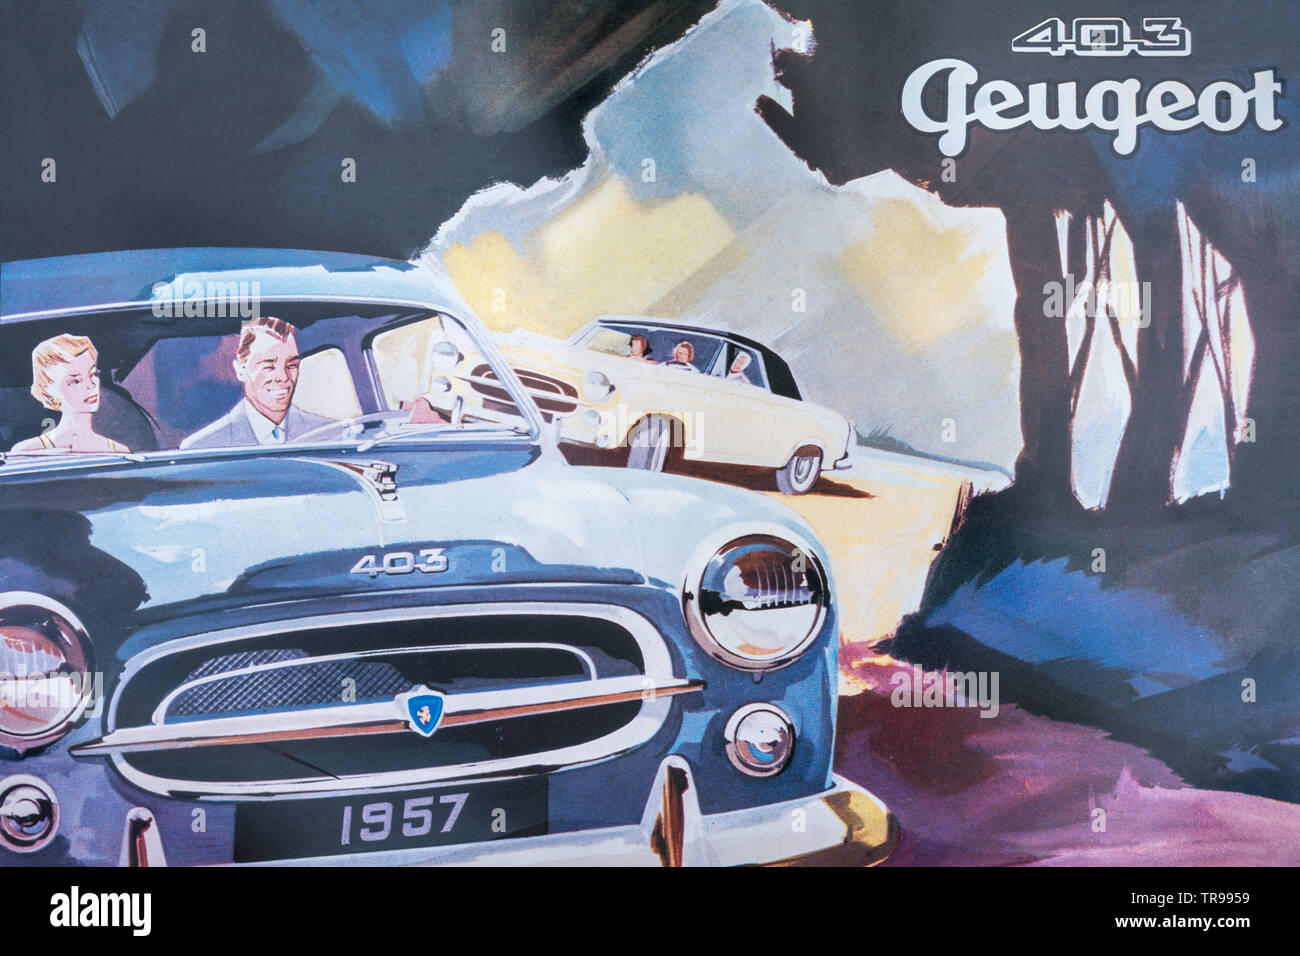 Original vintage car advertising poster for the classic Peugeot model 403 Stock Photo